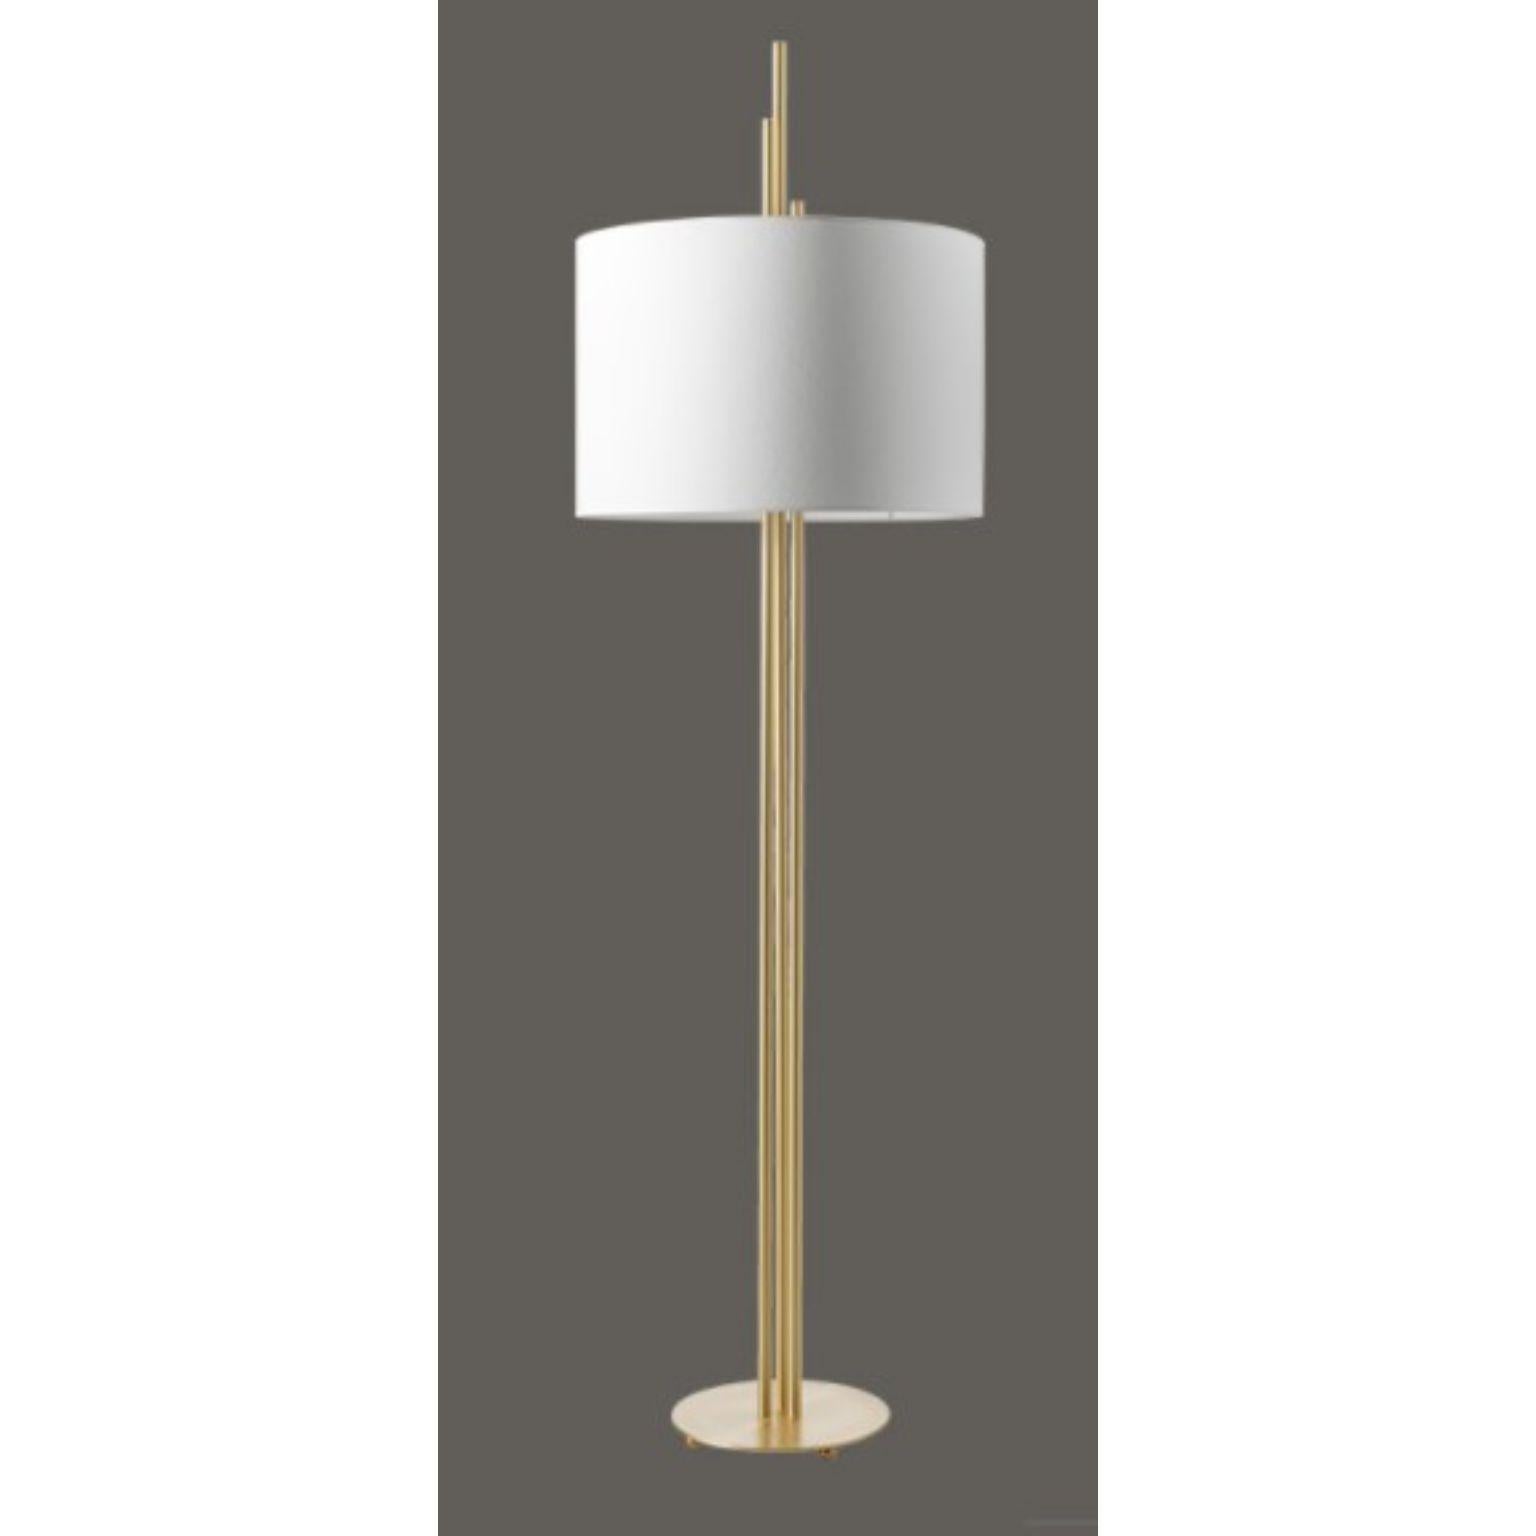 Upper floor lamp by Hervé Langlais
Dimensions: D 60 x H 200 cm
Materials: Solid brass, Lampshade Drop Paper® M1, Black textile cable (2m).
Others finishes are available.

All our lamps can be wired according to each country. If sold to the USA